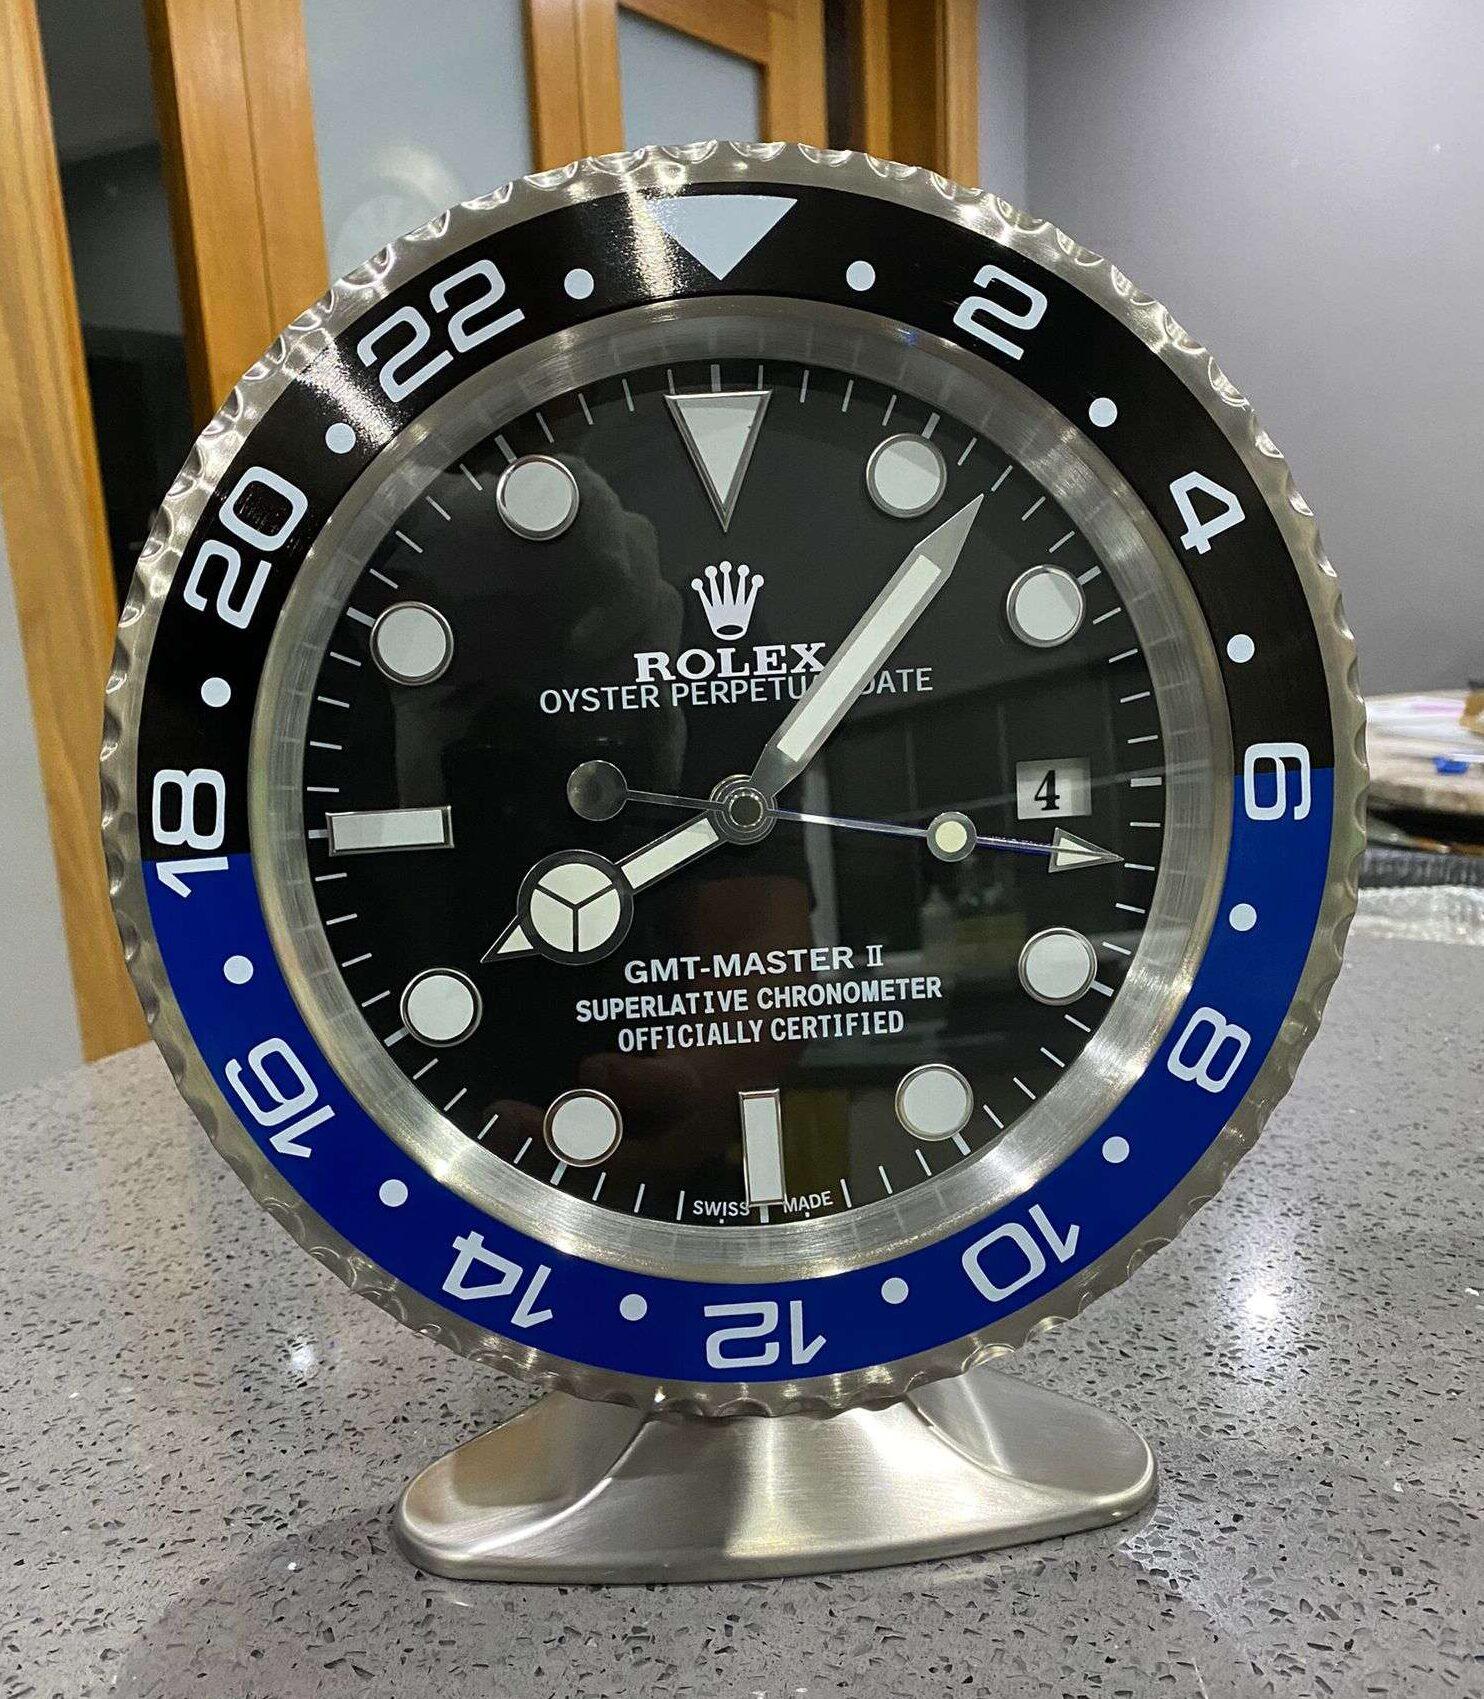 ROLEX Officially Certified Oyster Perpetual GMT Master II BATMAN Desk Clock 

Luminous hands.
Fully functional date.
Sweeping hands.
Quartz movement.
Good condition, working.
Free international shipping.

These wall clocks are officially licensed by